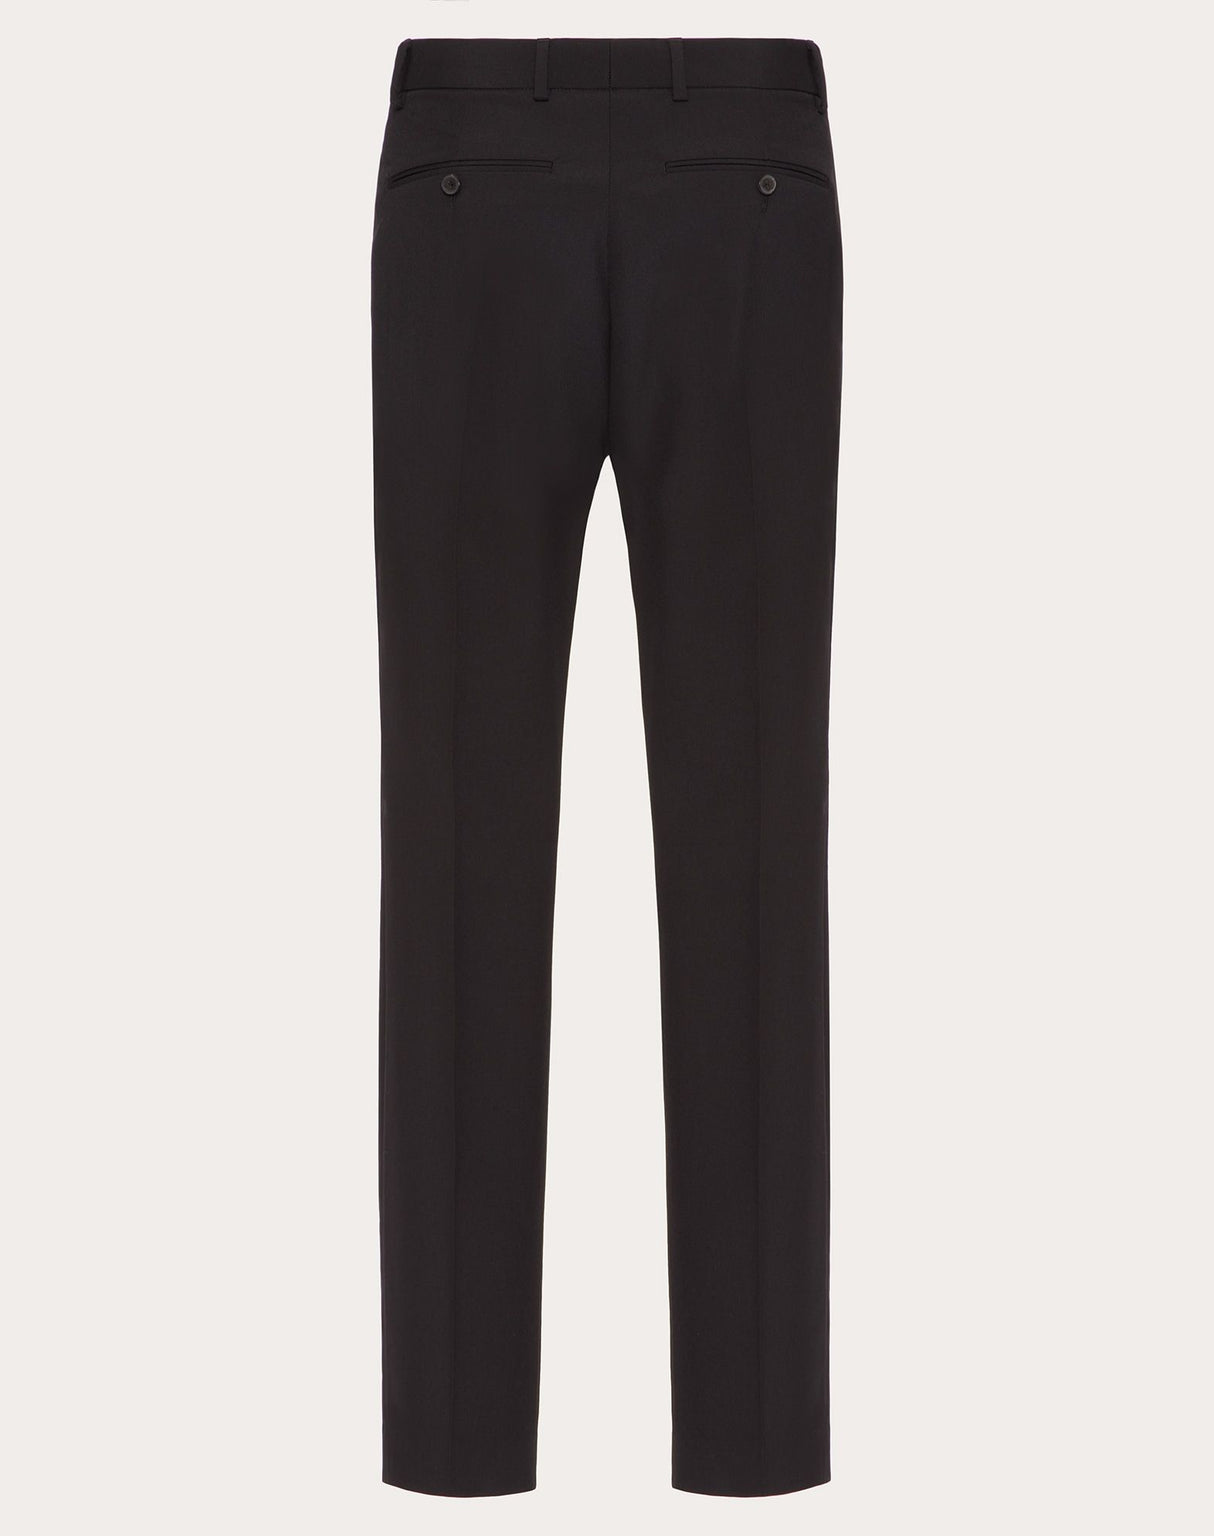 Sophisticated Slim Trousers in Classic Black for Men